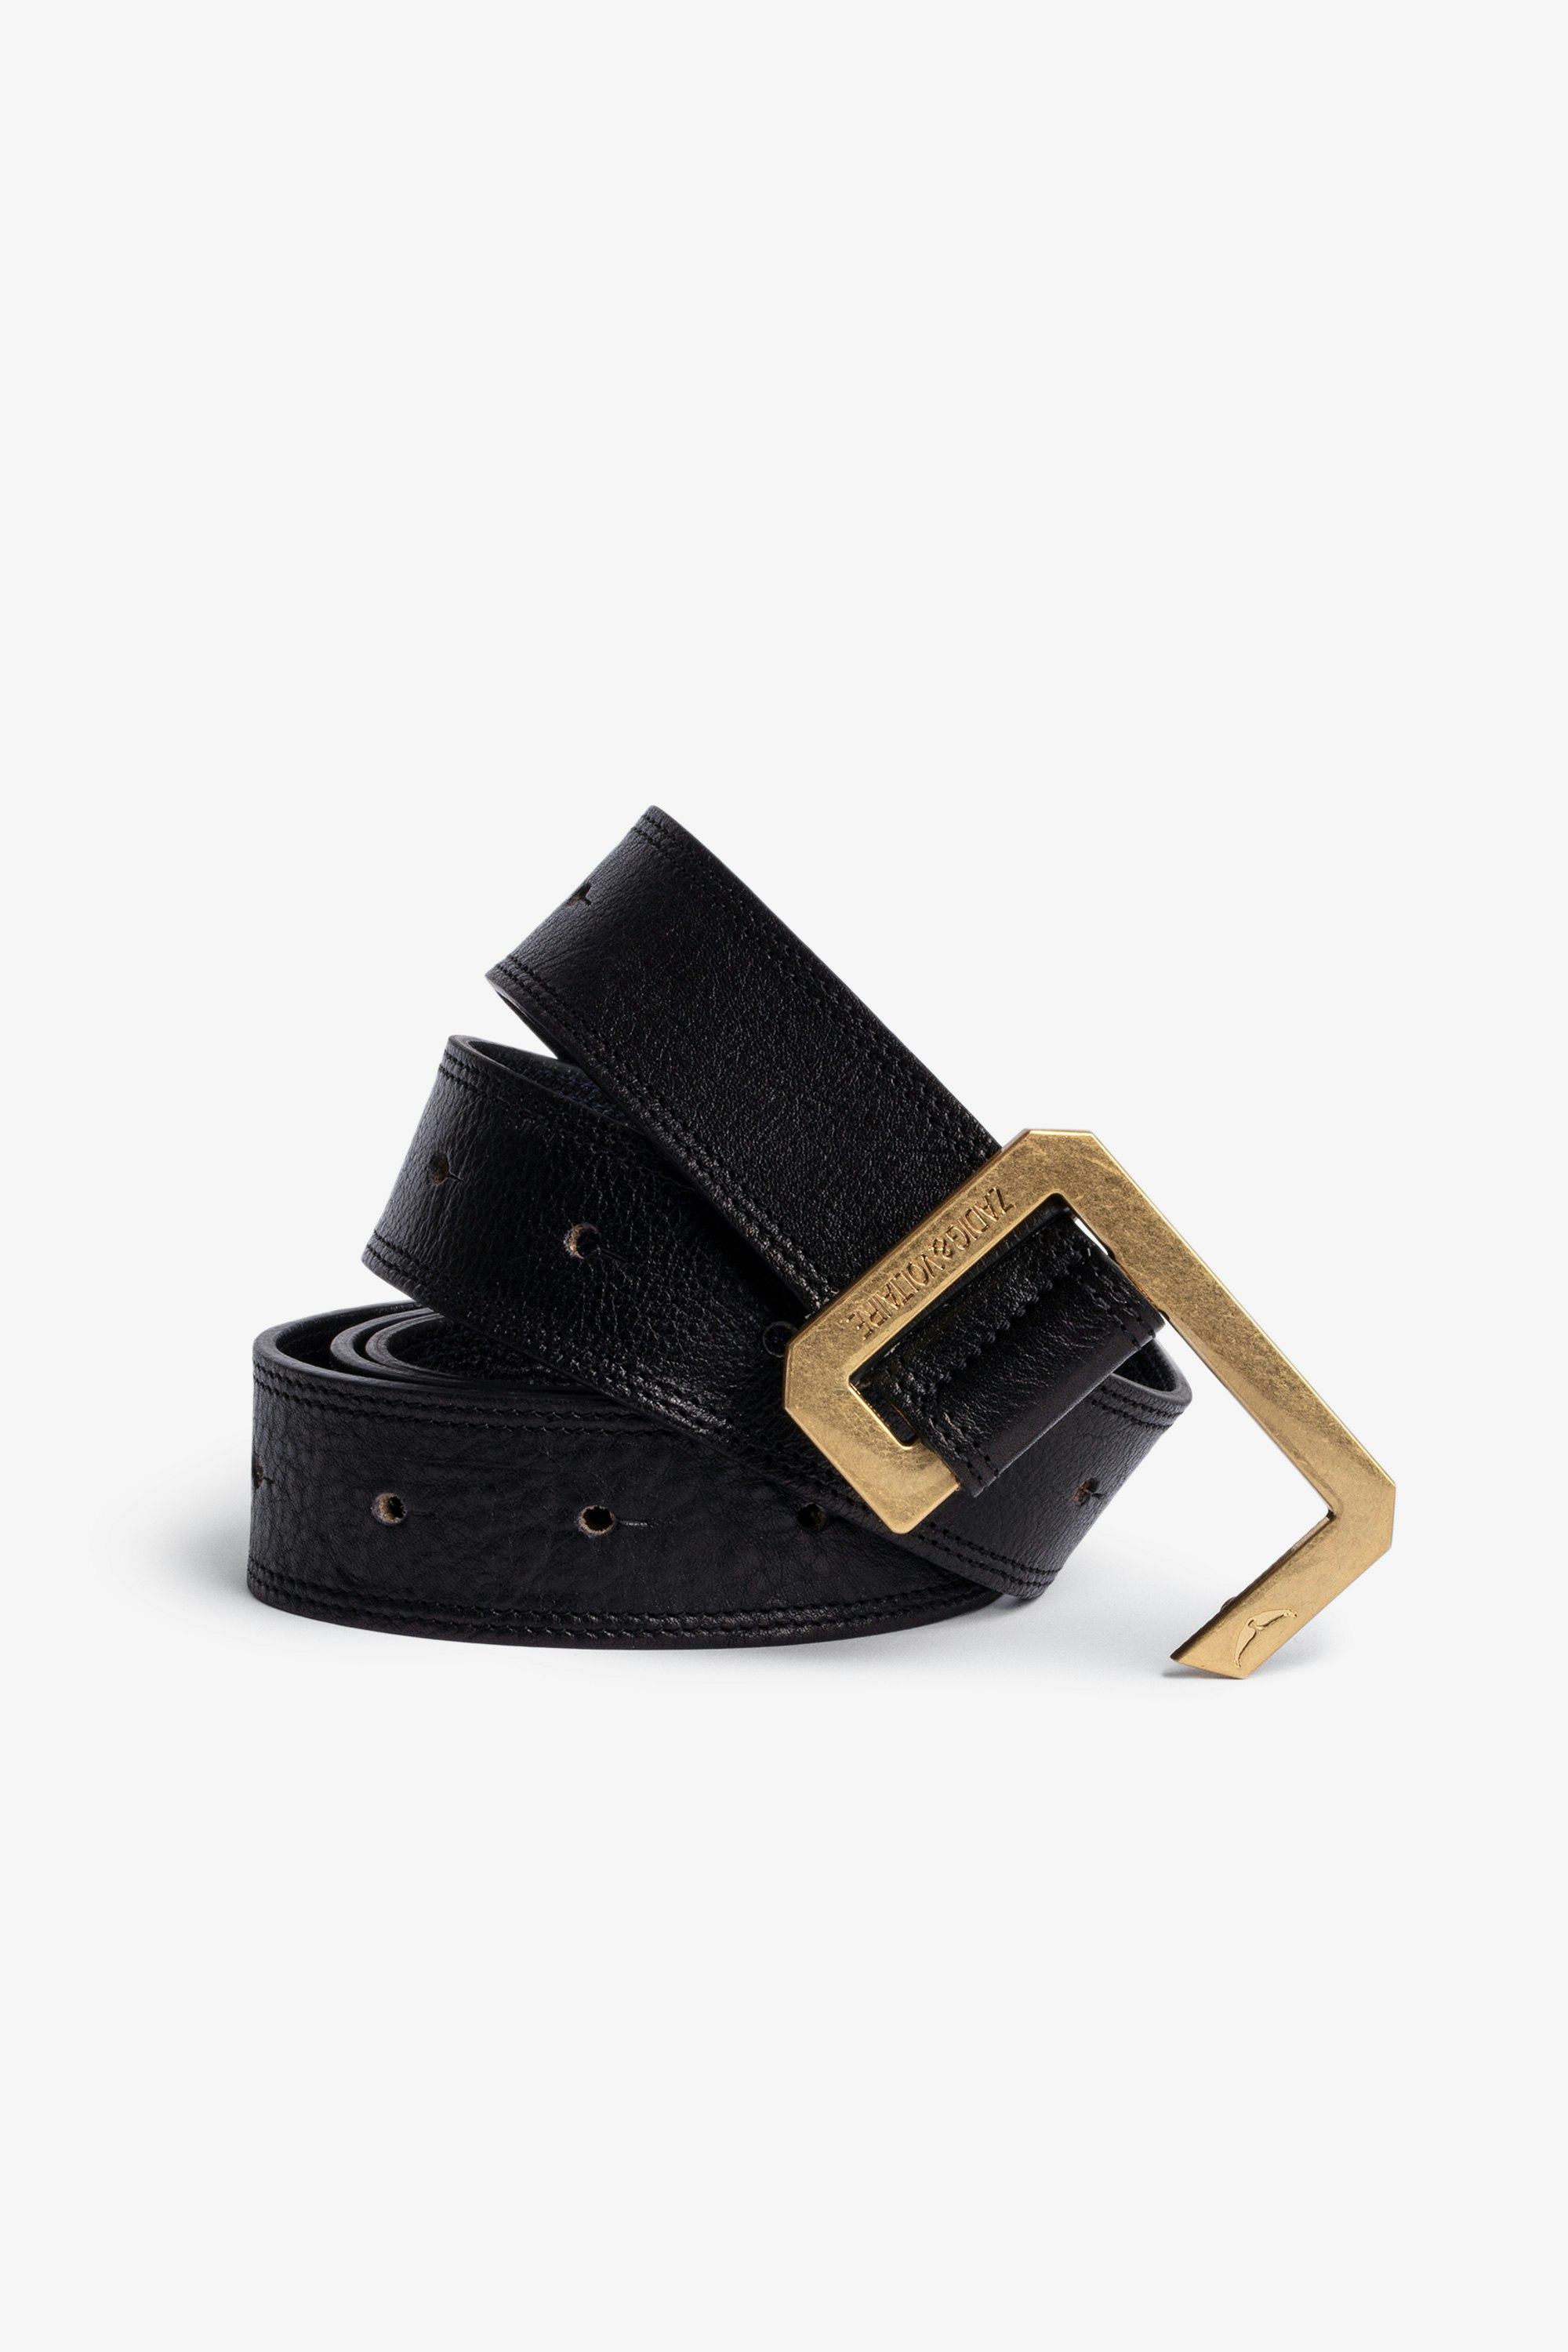 Le Cecilia Belt Leather Women’s black leather belt with C buckle